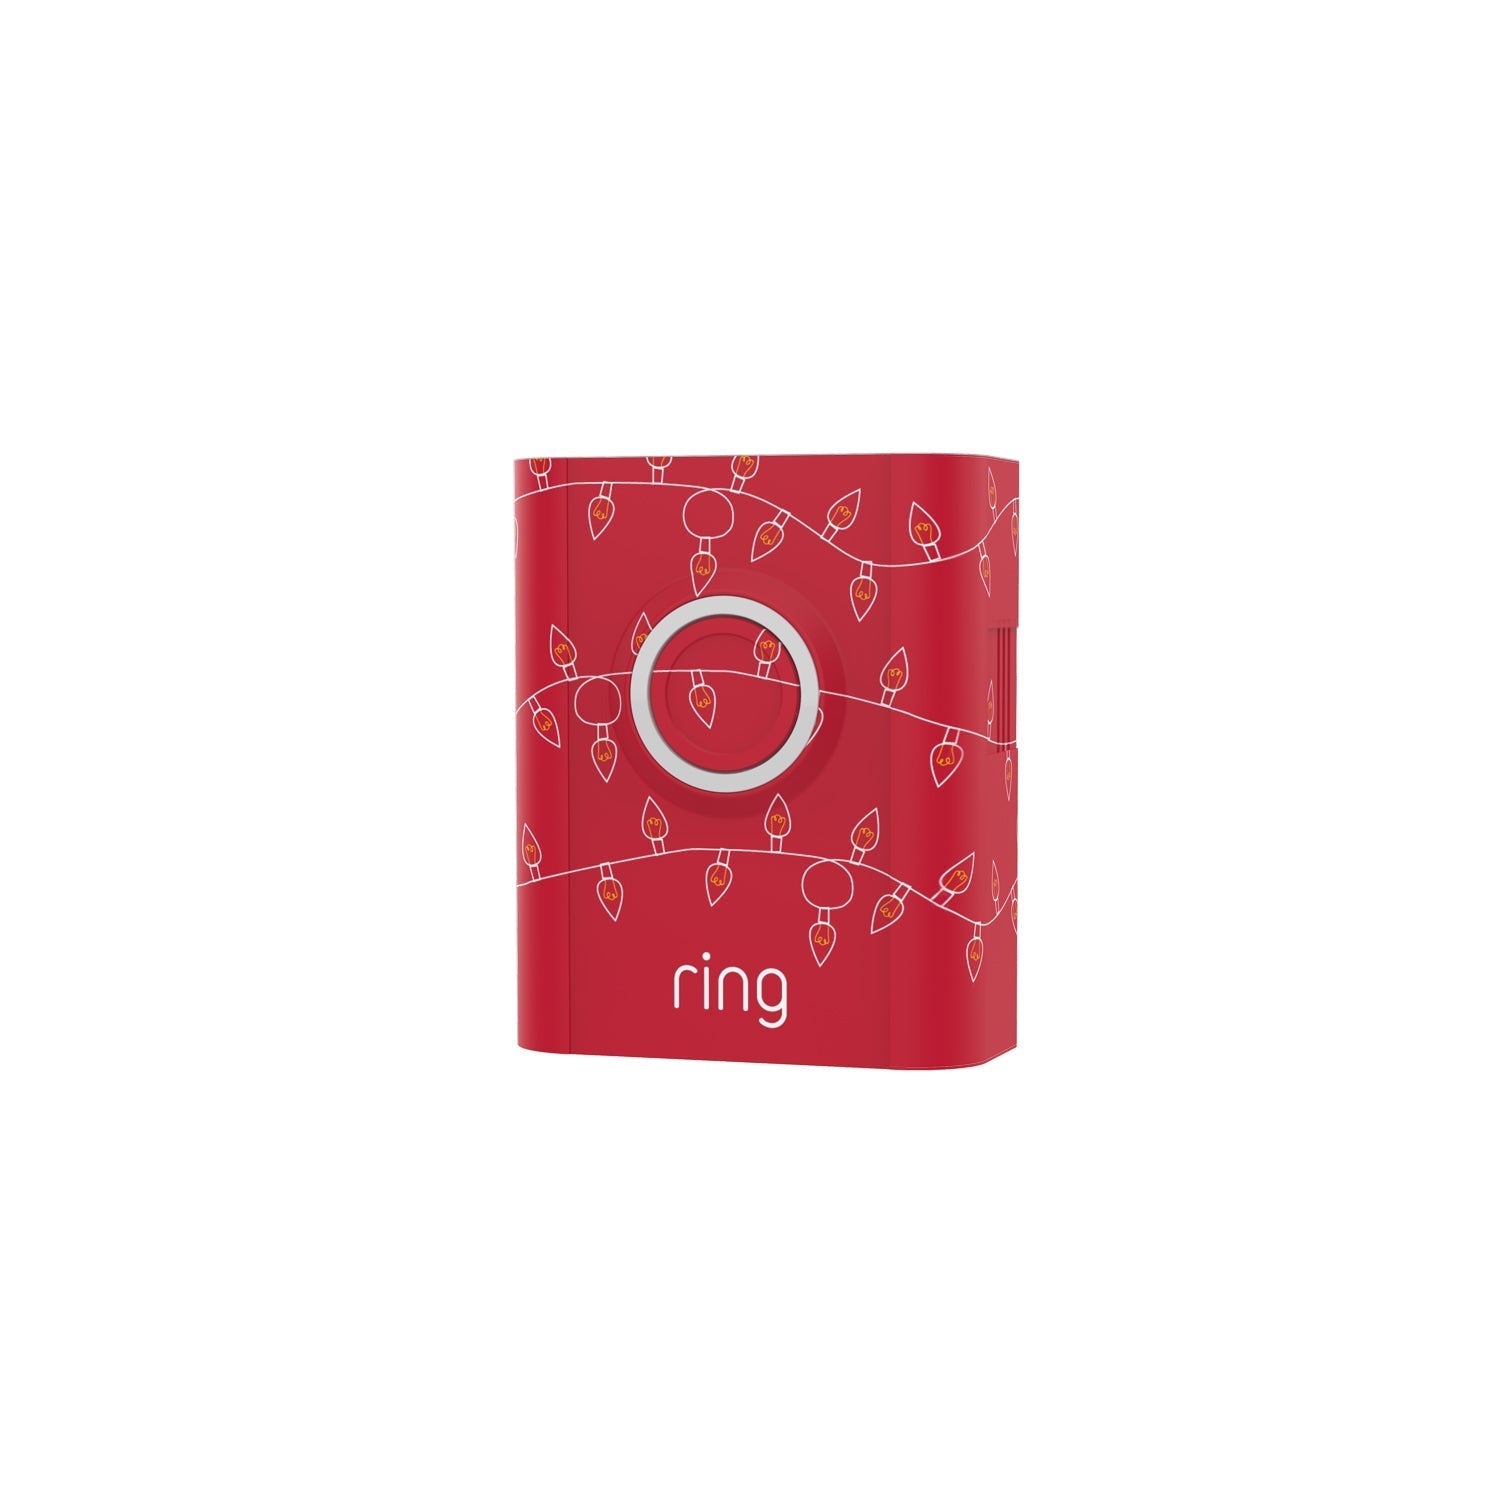 Holiday Interchangeable Faceplate (for Video Doorbell 3, Video Doorbell 3 Plus, Video Doorbell 4, Battery Doorbell Plus, Battery Doorbell Pro) - Christmas Lights Red